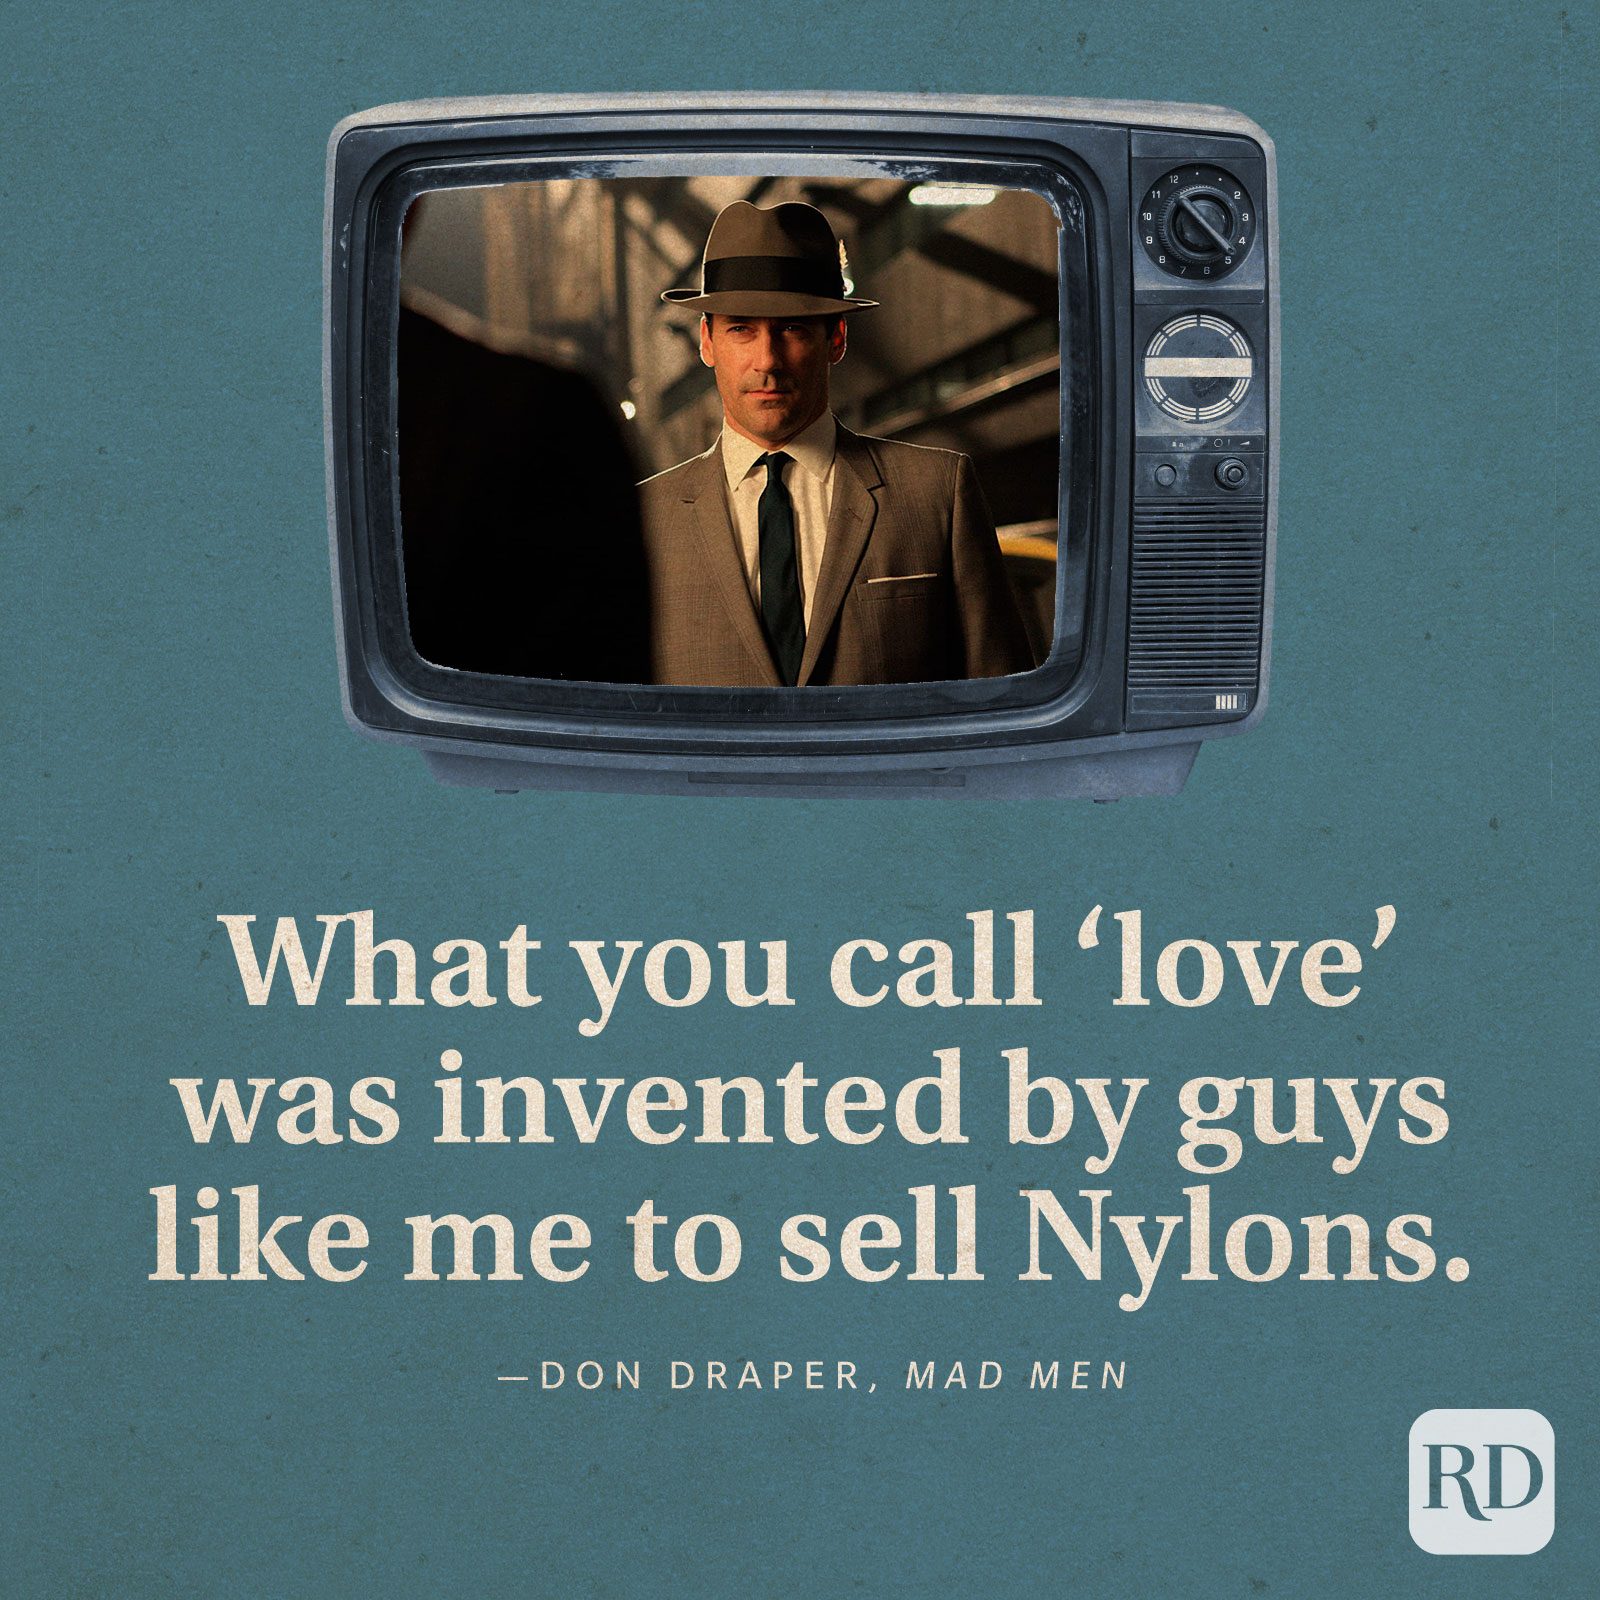 “What you call ‘love’ was invented by guys like me to sell Nylons.” -Don Draper in Mad Men.